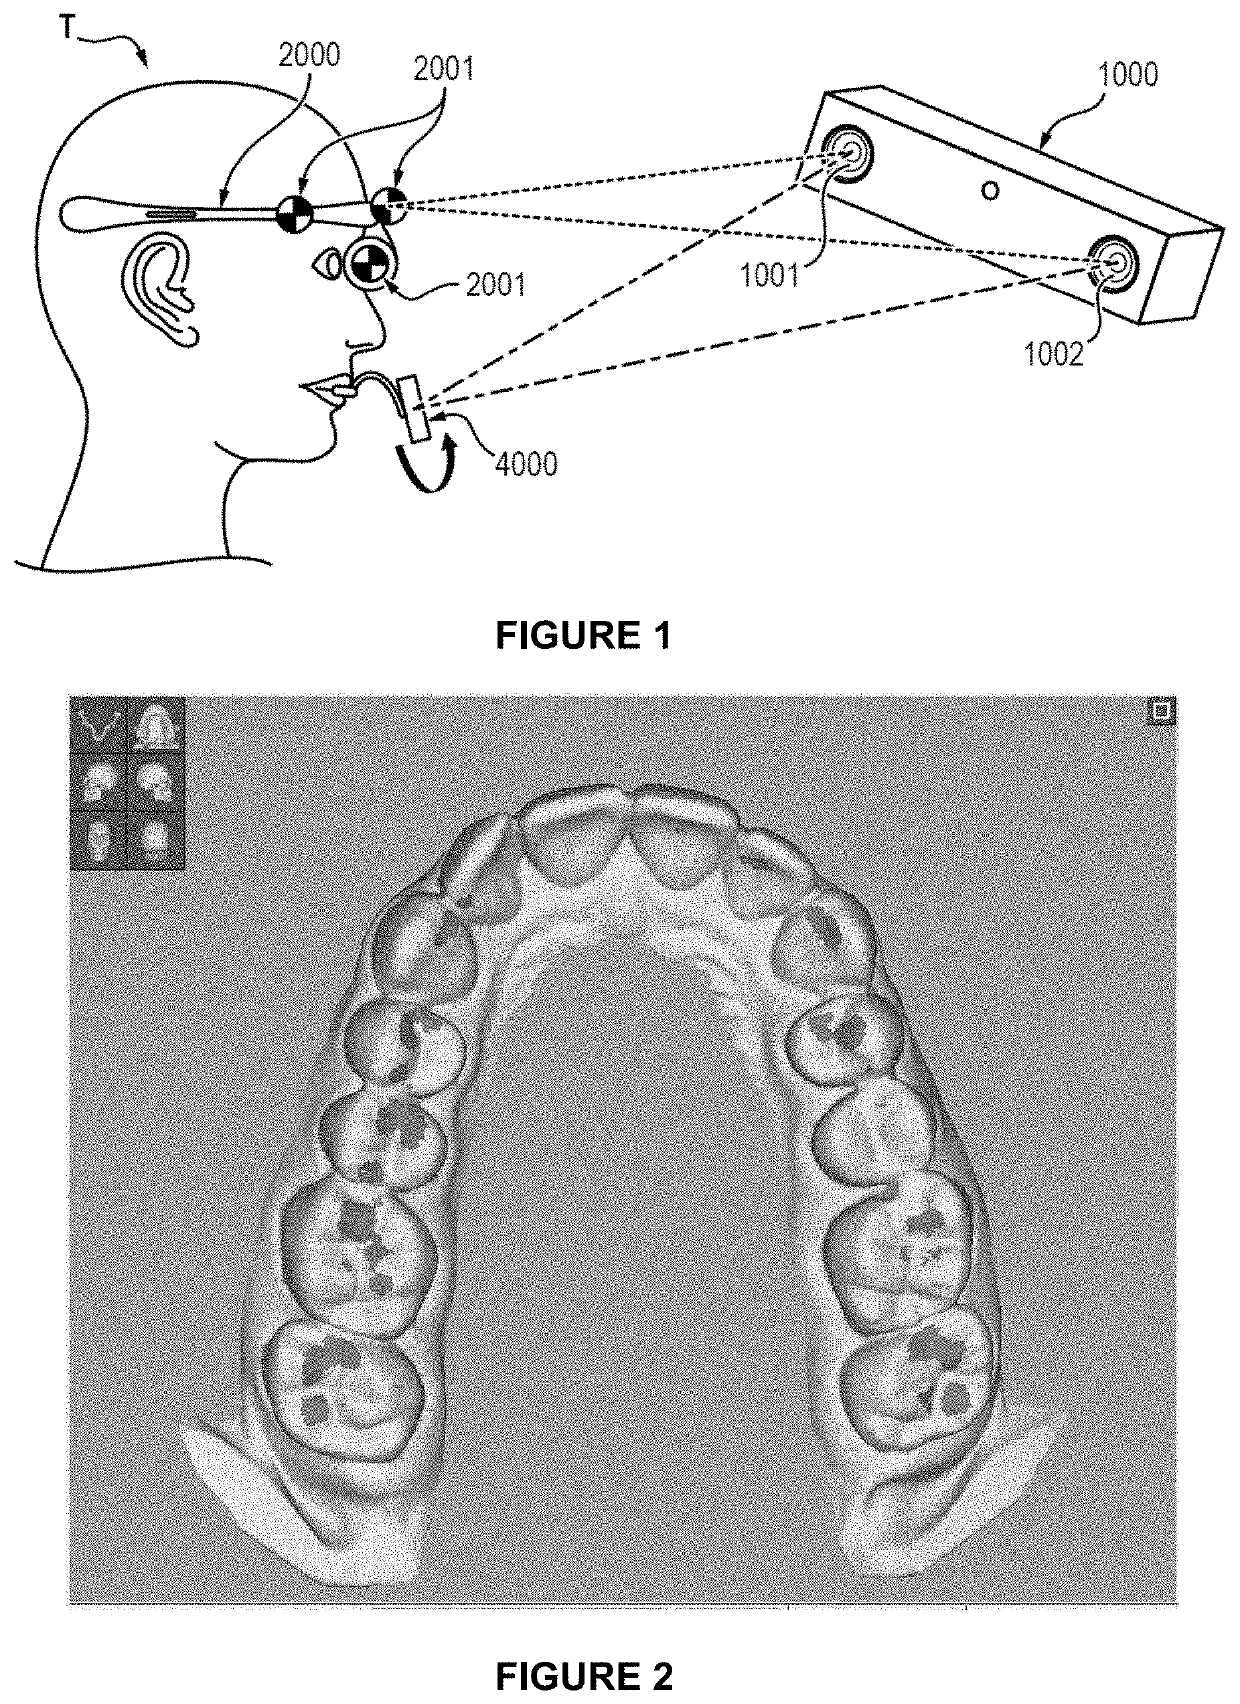 Method for determining a mapping of the contacts and/or distances between the maxillary and mandibular arches of a patient